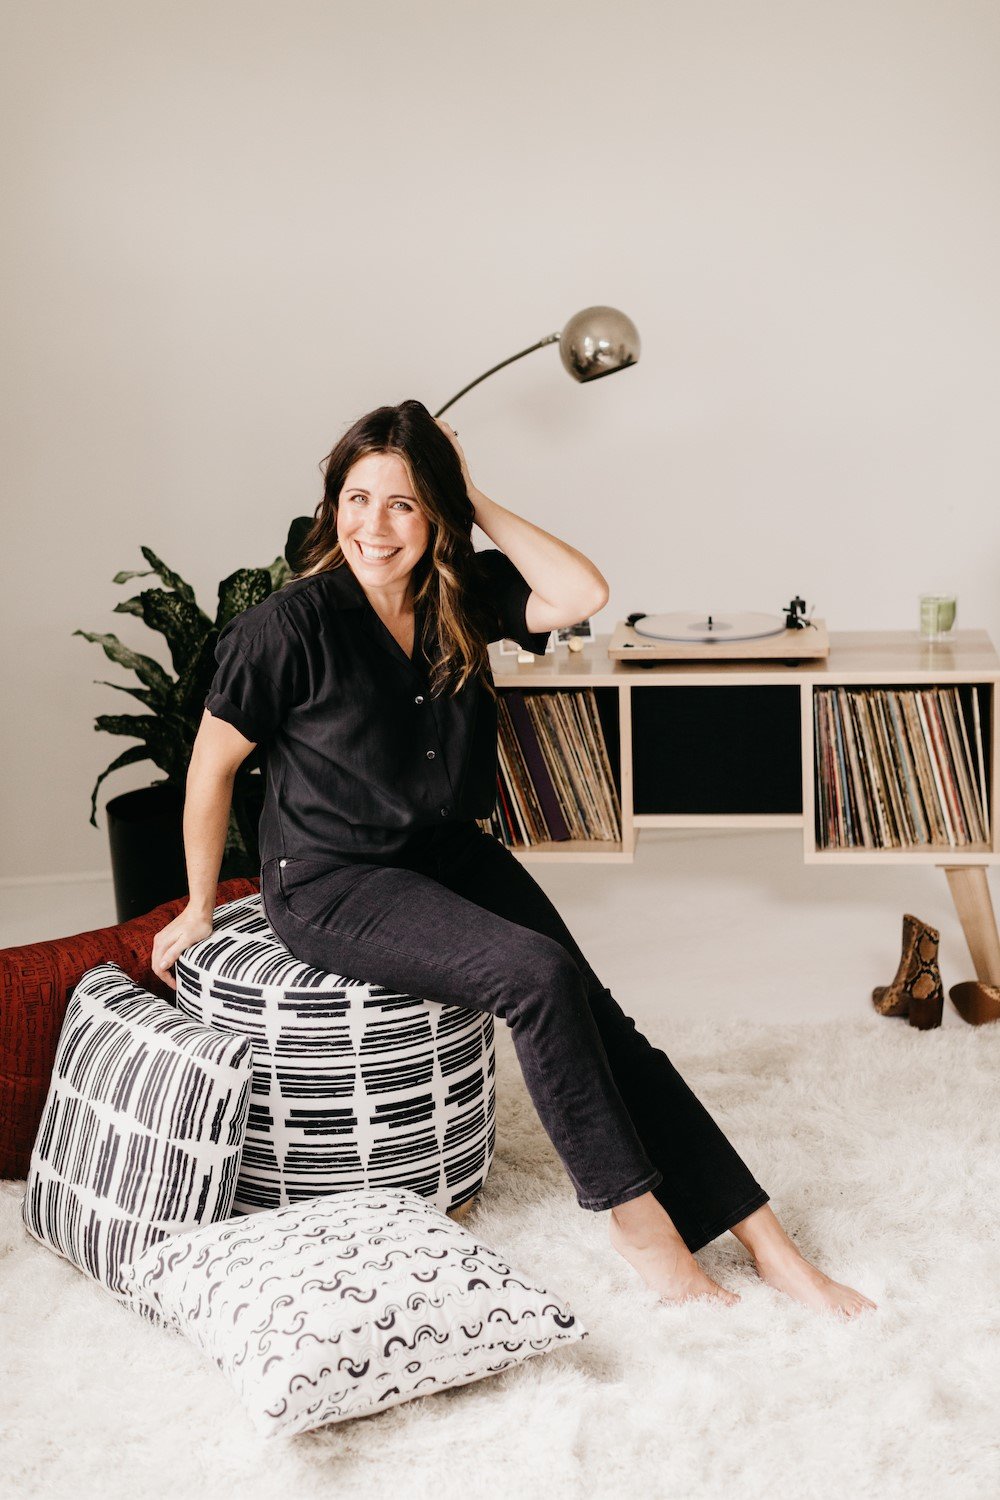 Courtney Krug is the owner and founder of AT300NELSON.